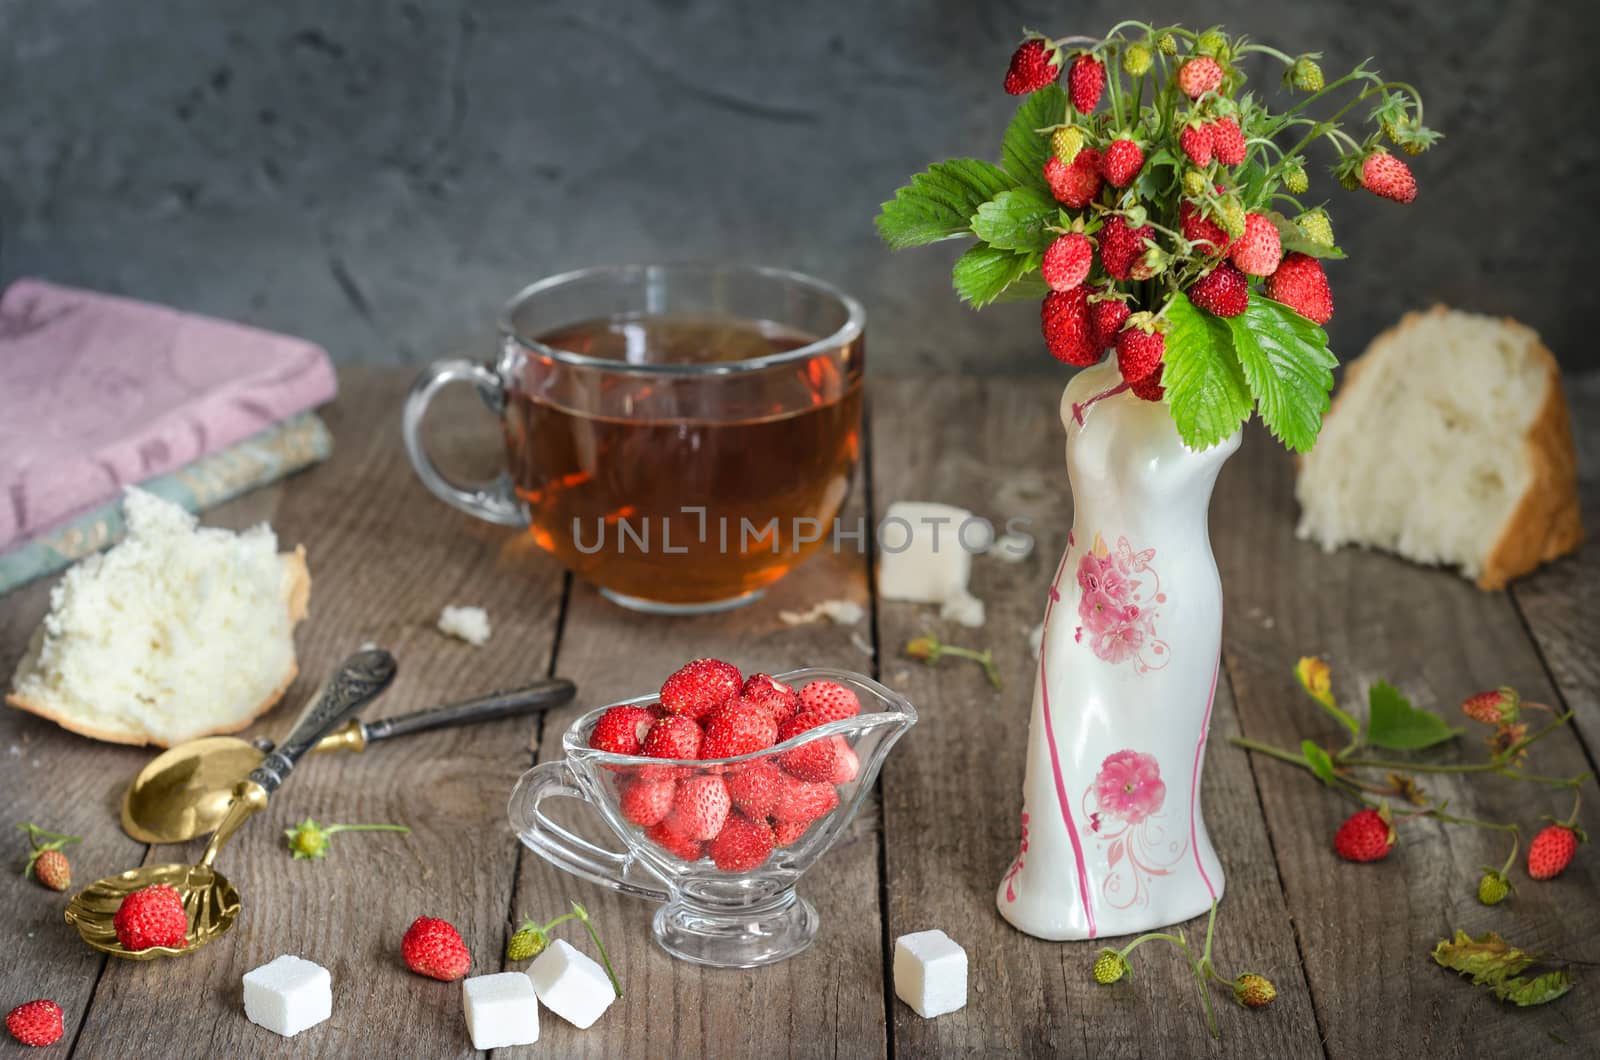 The strawberries on the table and tea by Gaina